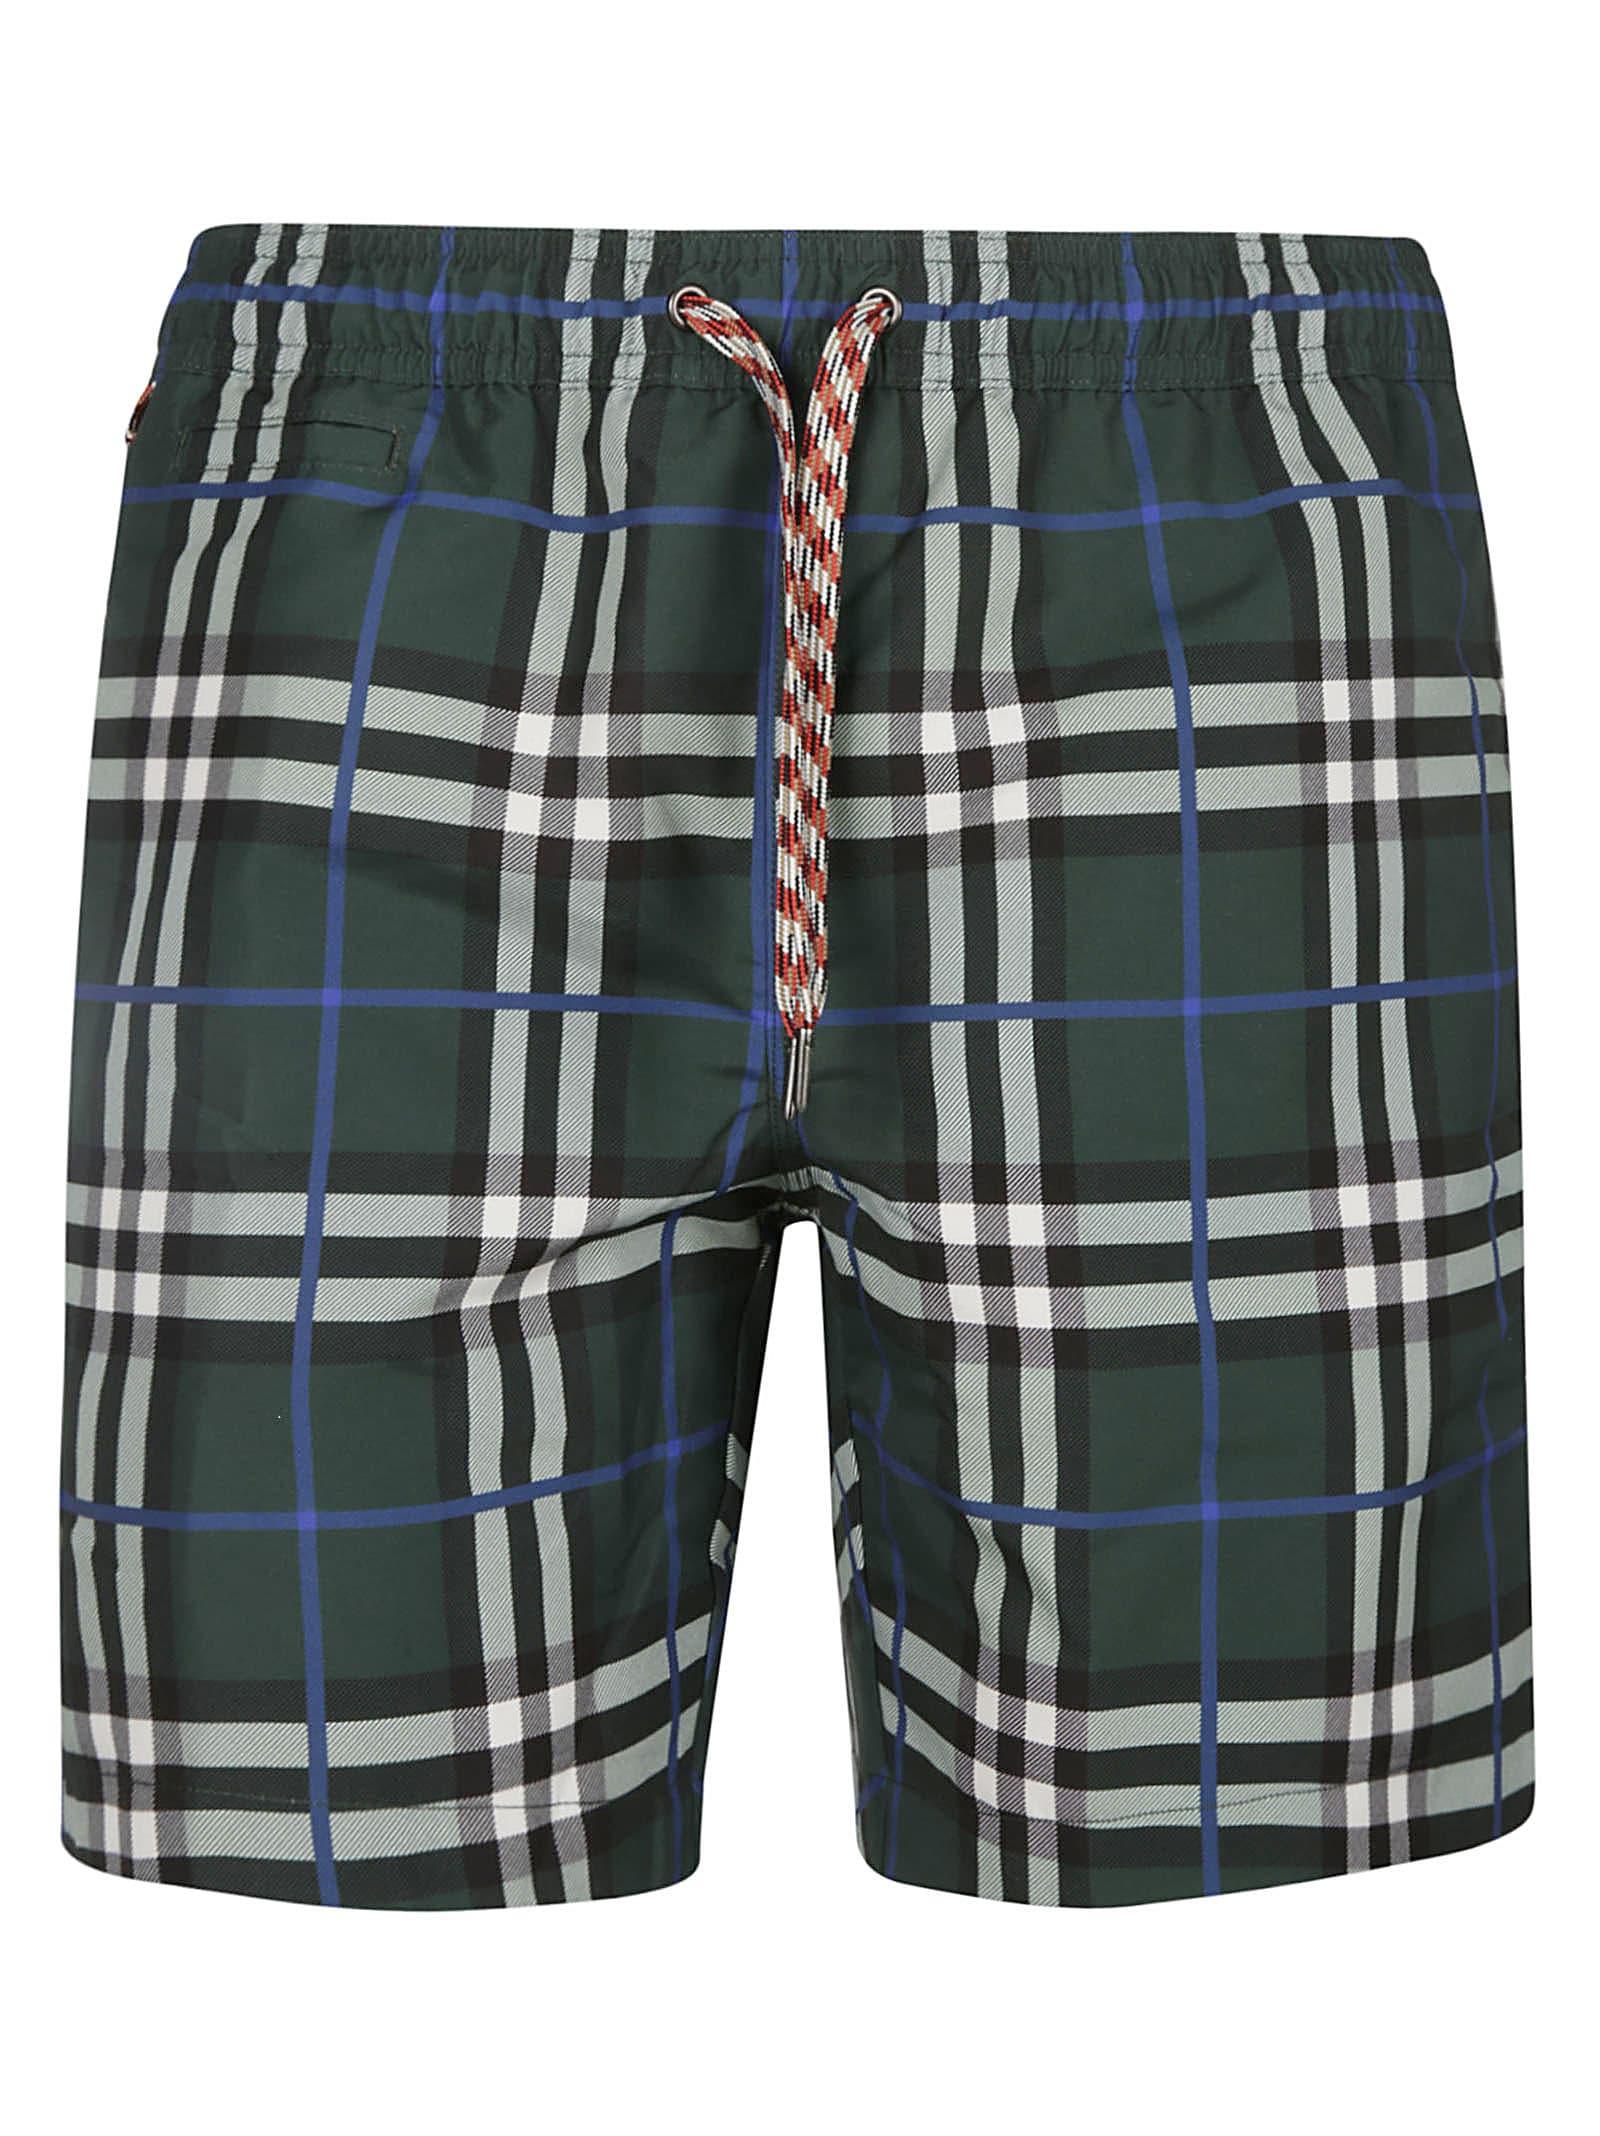 Burberry Synthetic Martin Check Shorts in Dark Forest Green (Green 